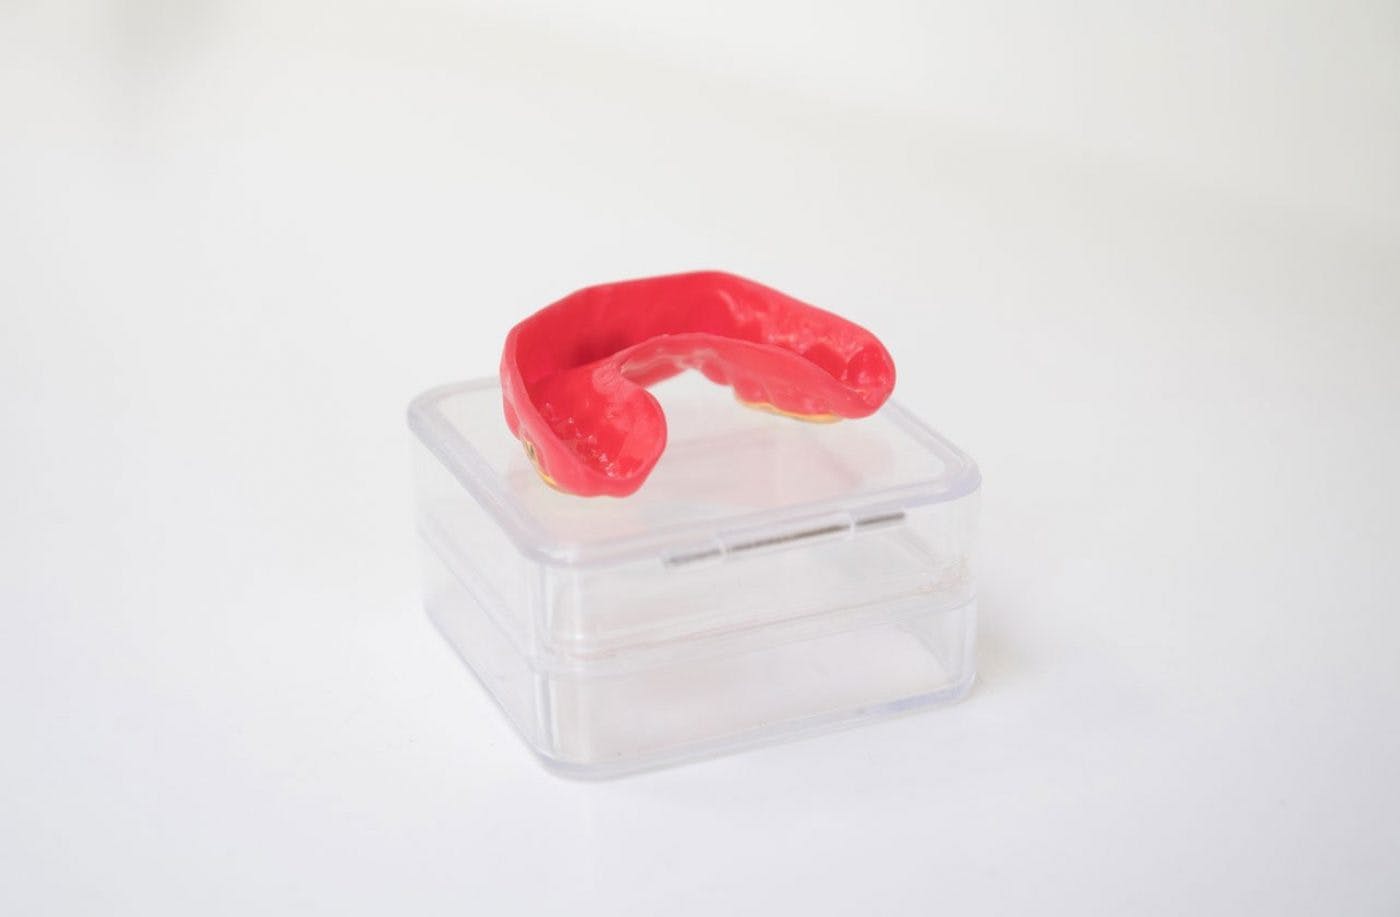 Laurajones Other Mouthguards